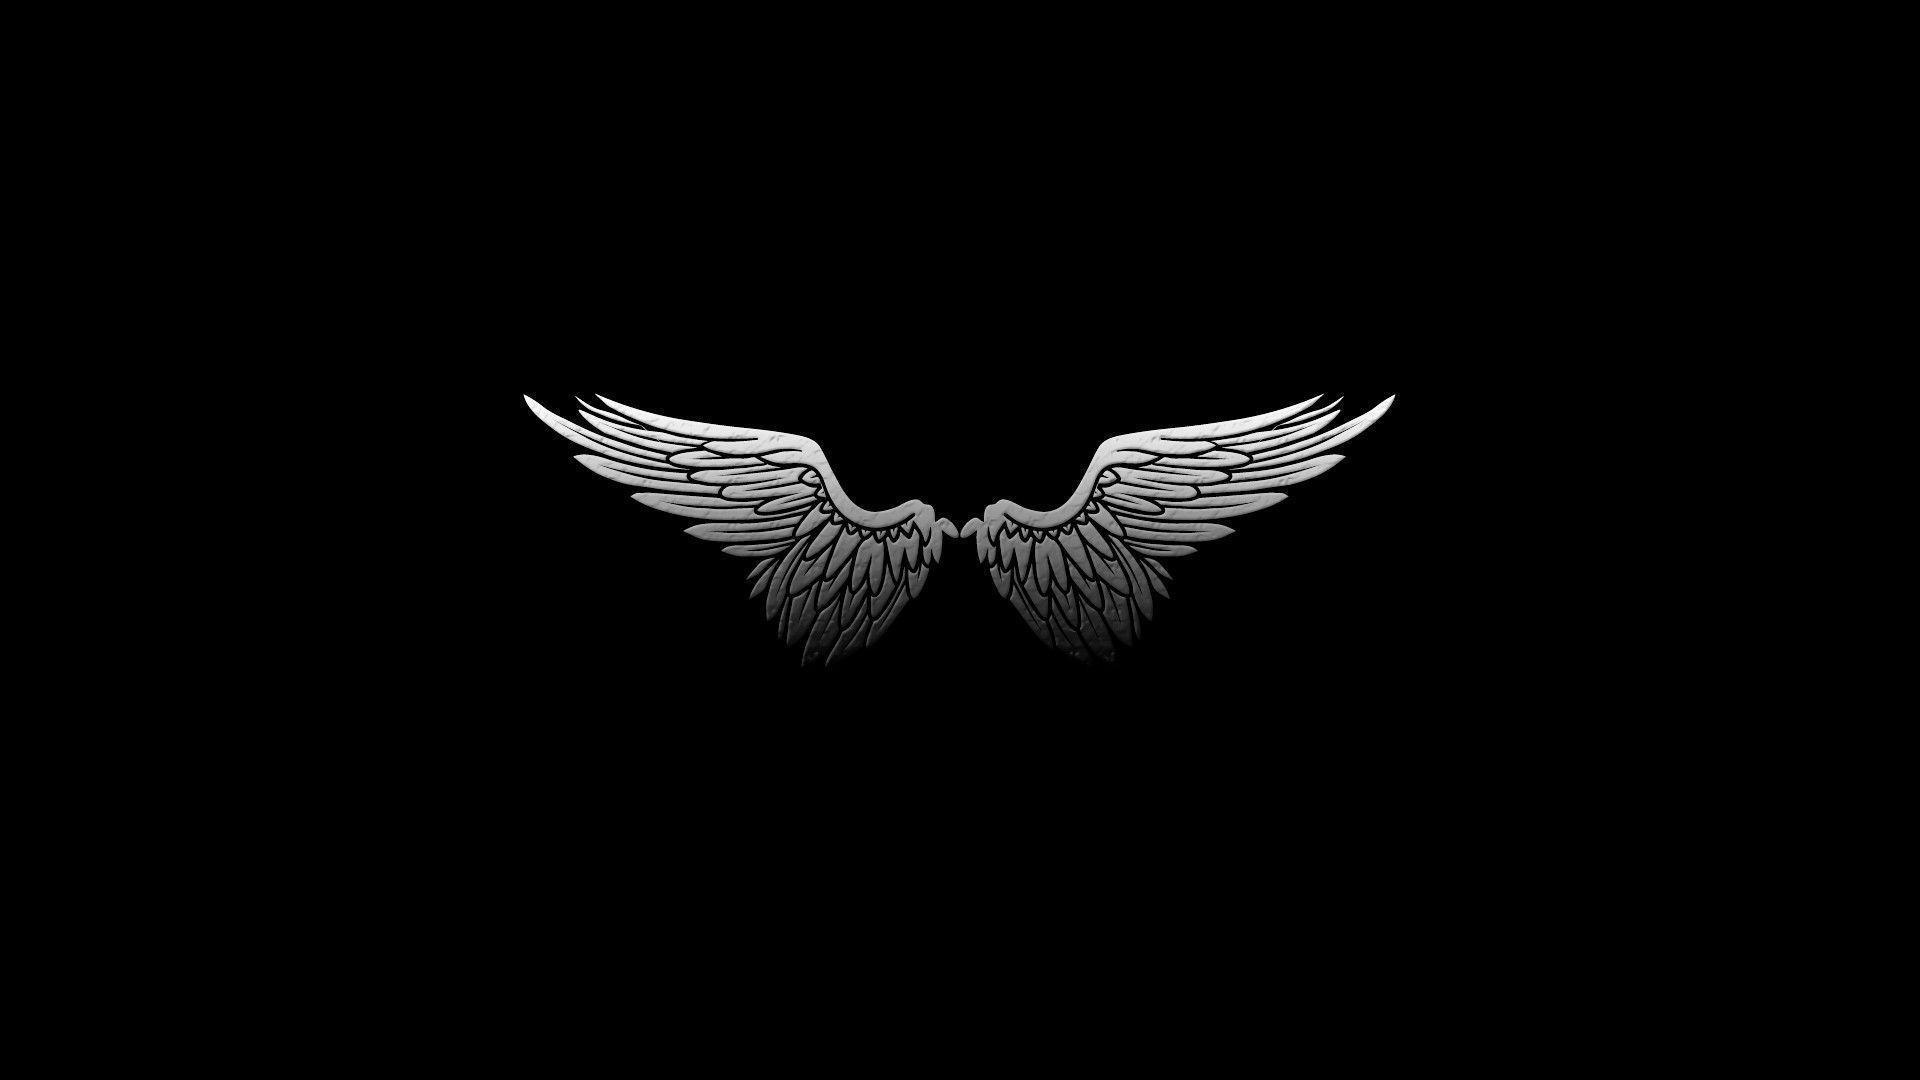 Angel Wings Natural Black Wing Plumage Isolated On White Background With  Clipping Part Stock Photo  Download Image Now  iStock